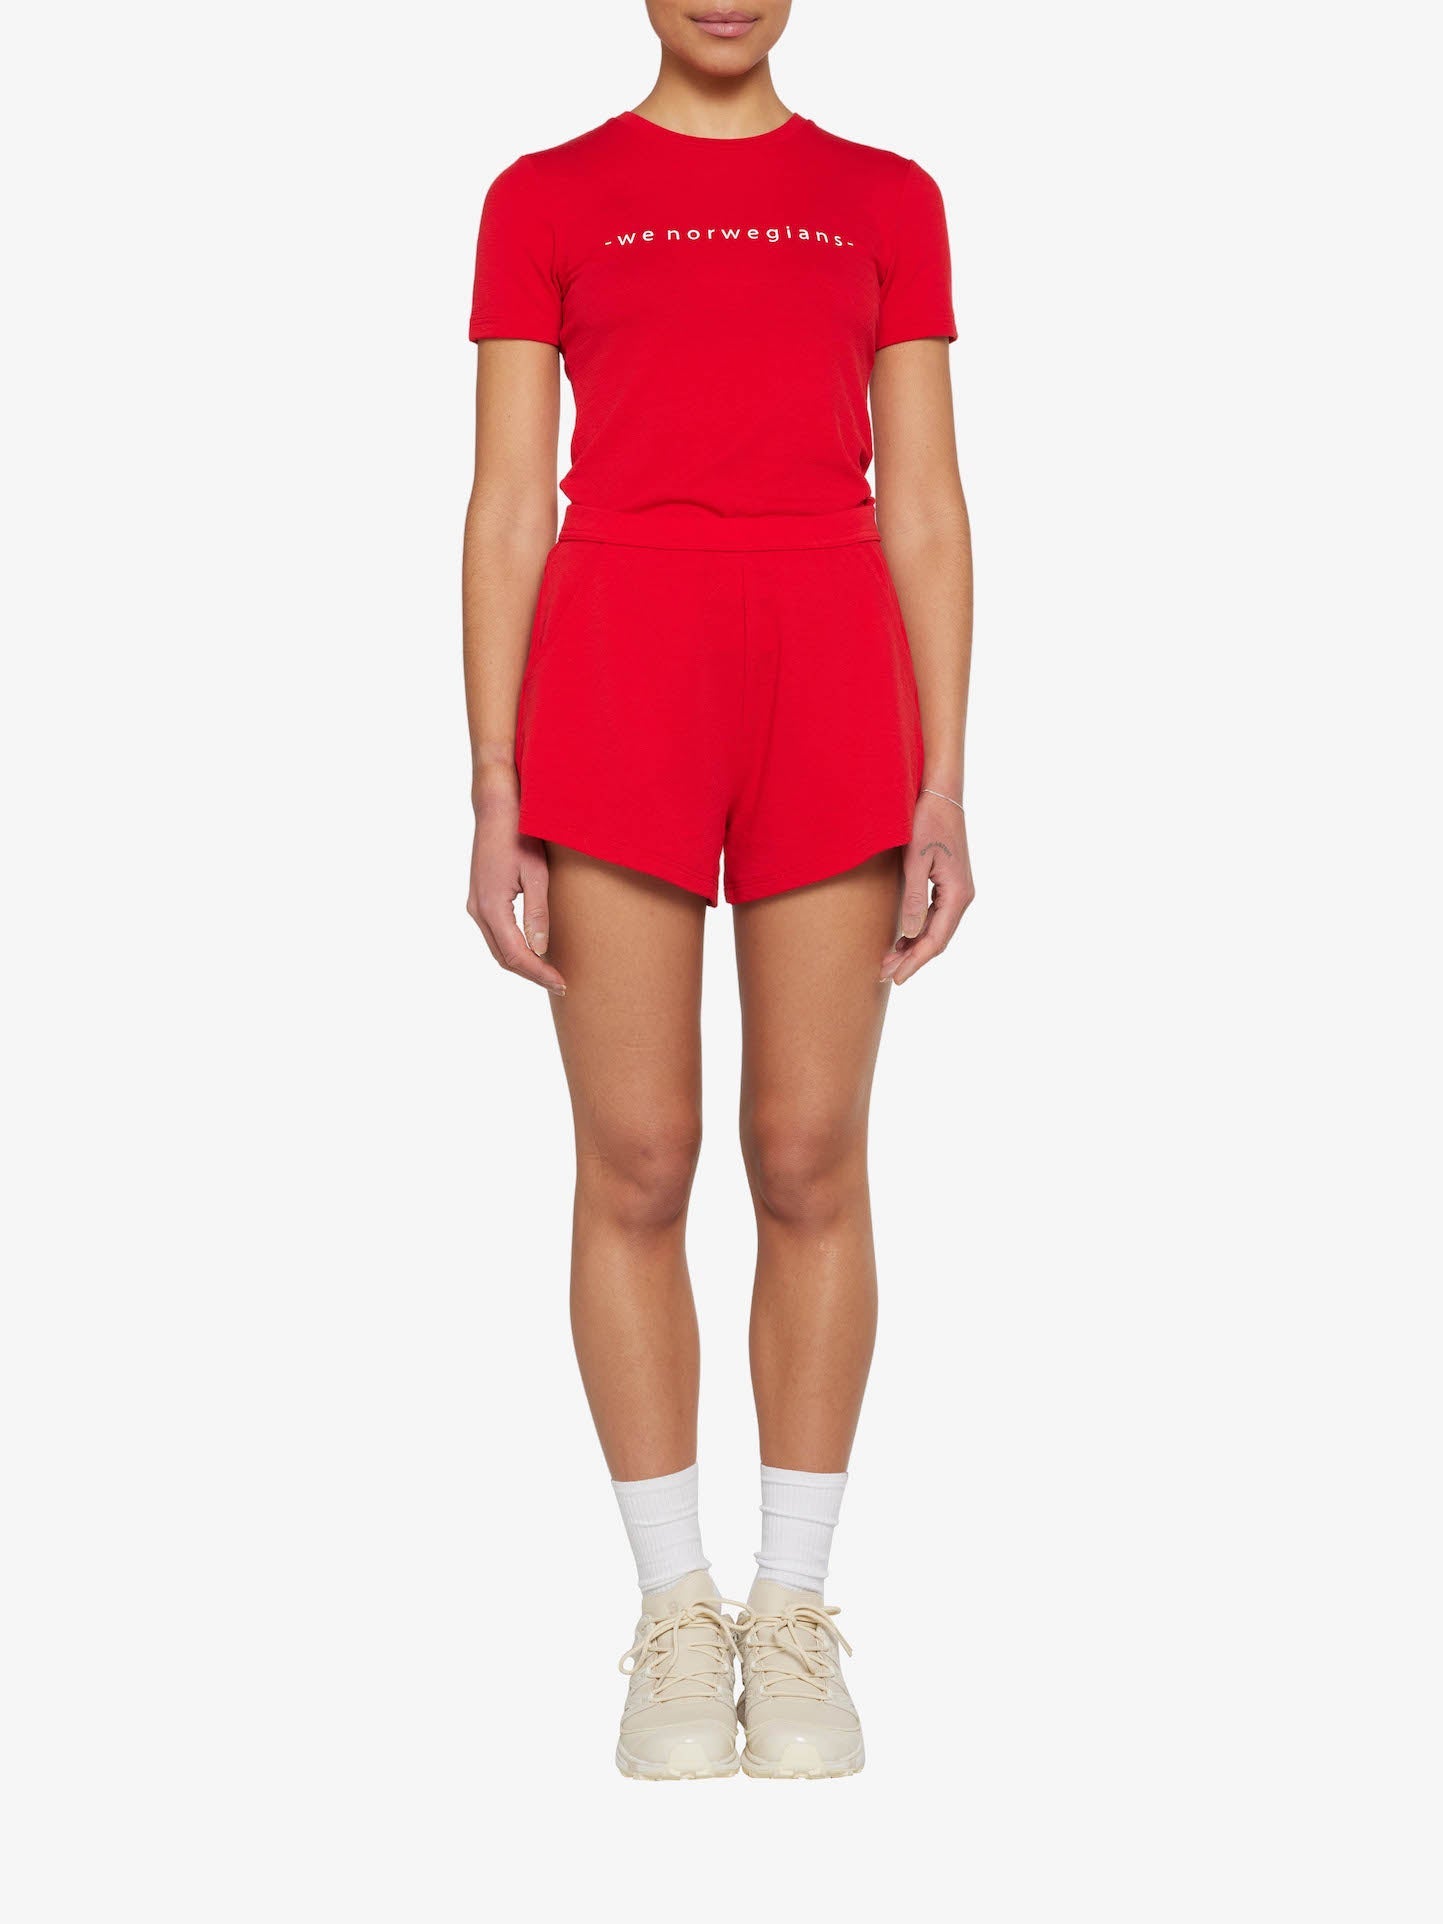 Lindesnes Tee Women Red